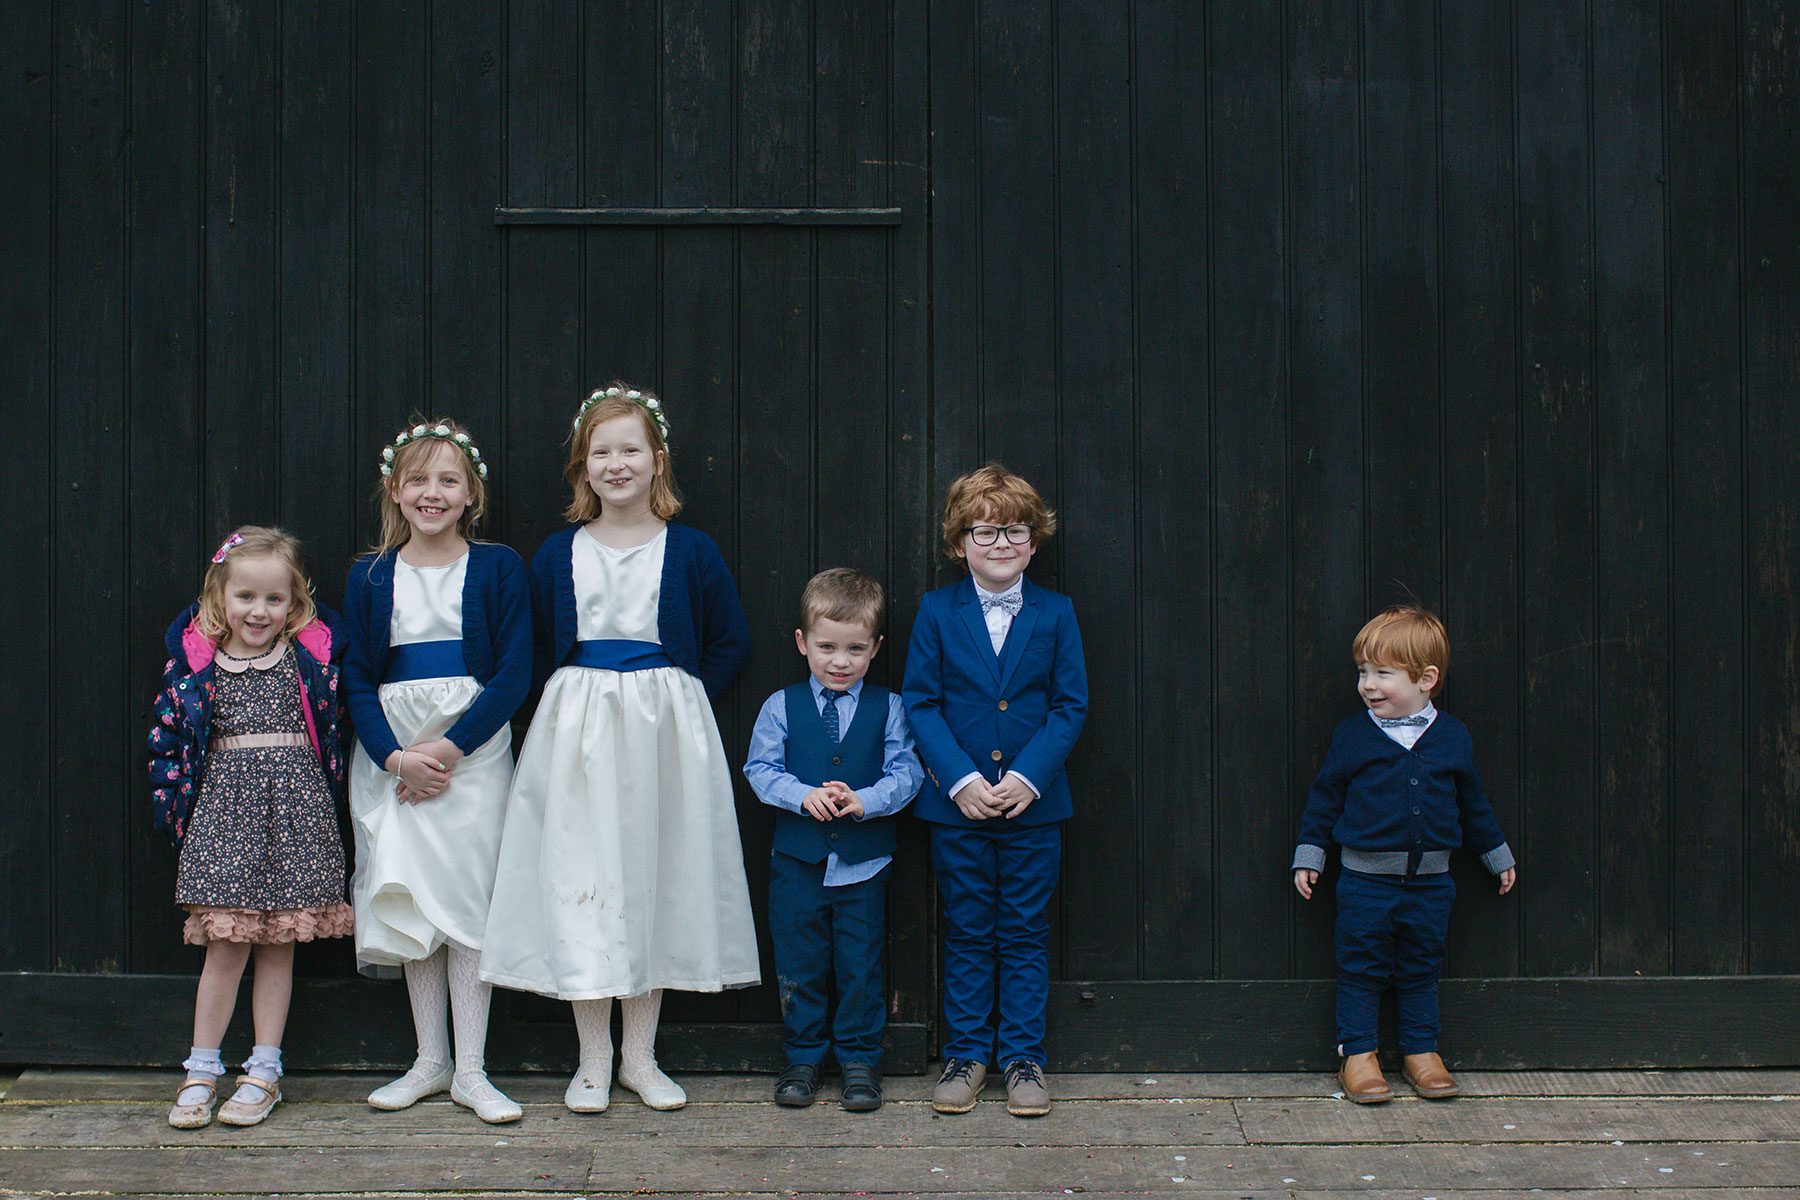 Wedding Photographer, Lains Barn, Photography in Cheltenham, the Cotswolds and the surrounding areas.